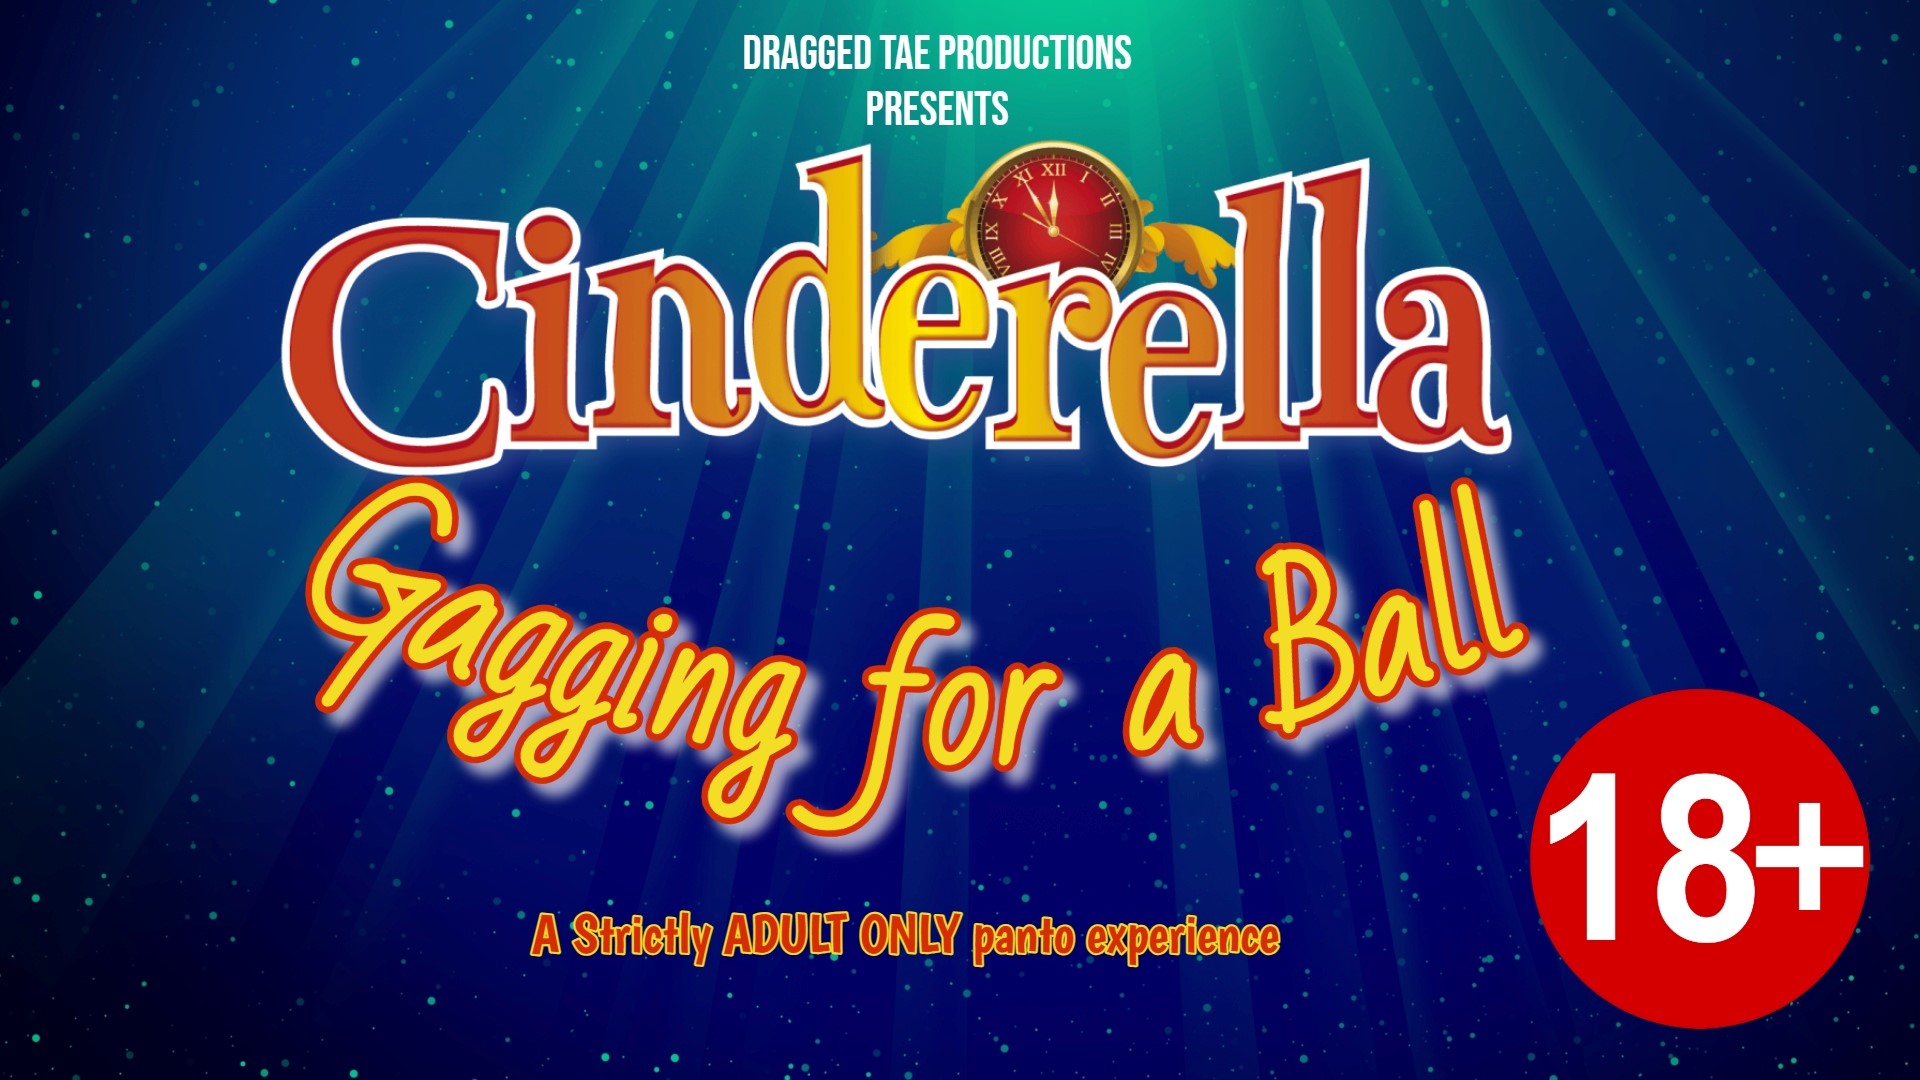 Cinderella - Gagging for a Ball at Cumnock Town Hall